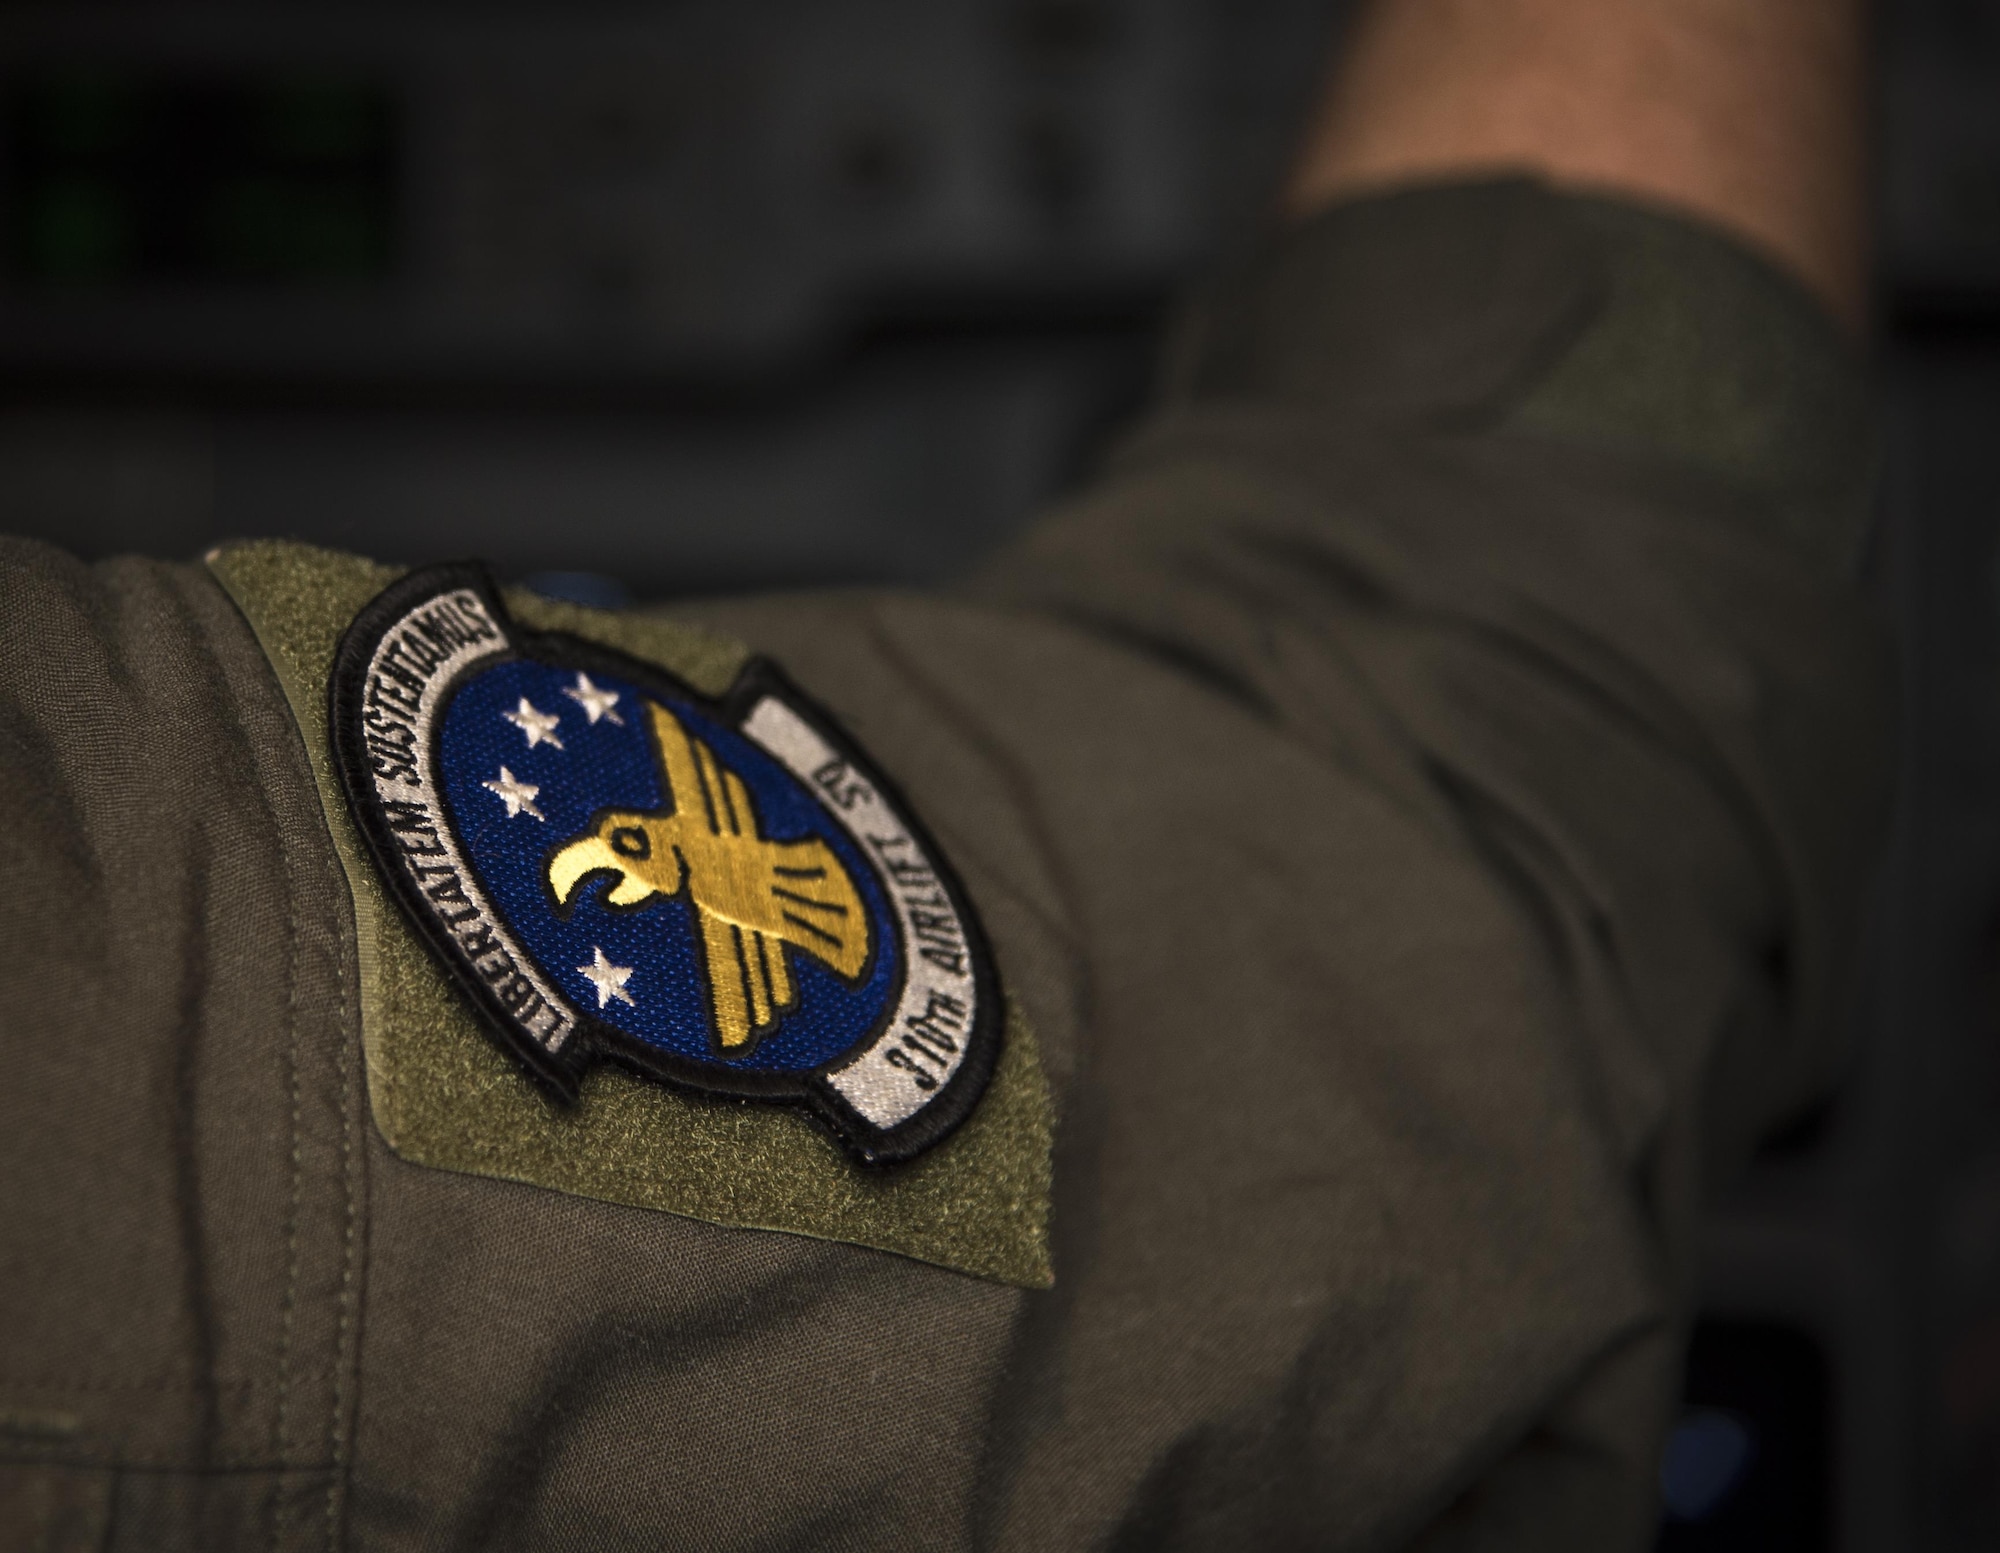 A flight engineer with the 310th Airlift Squadron performs preflight checklist procedures at MacDill Air Force Base, Fla., April 13, 2017. The flight engineers assigned to the 310th AS travel around the world with their aircraft to ensure the aircraft is mission ready at all times. (U.S. Air Force photo by Airman 1st Class Mariette Adams)